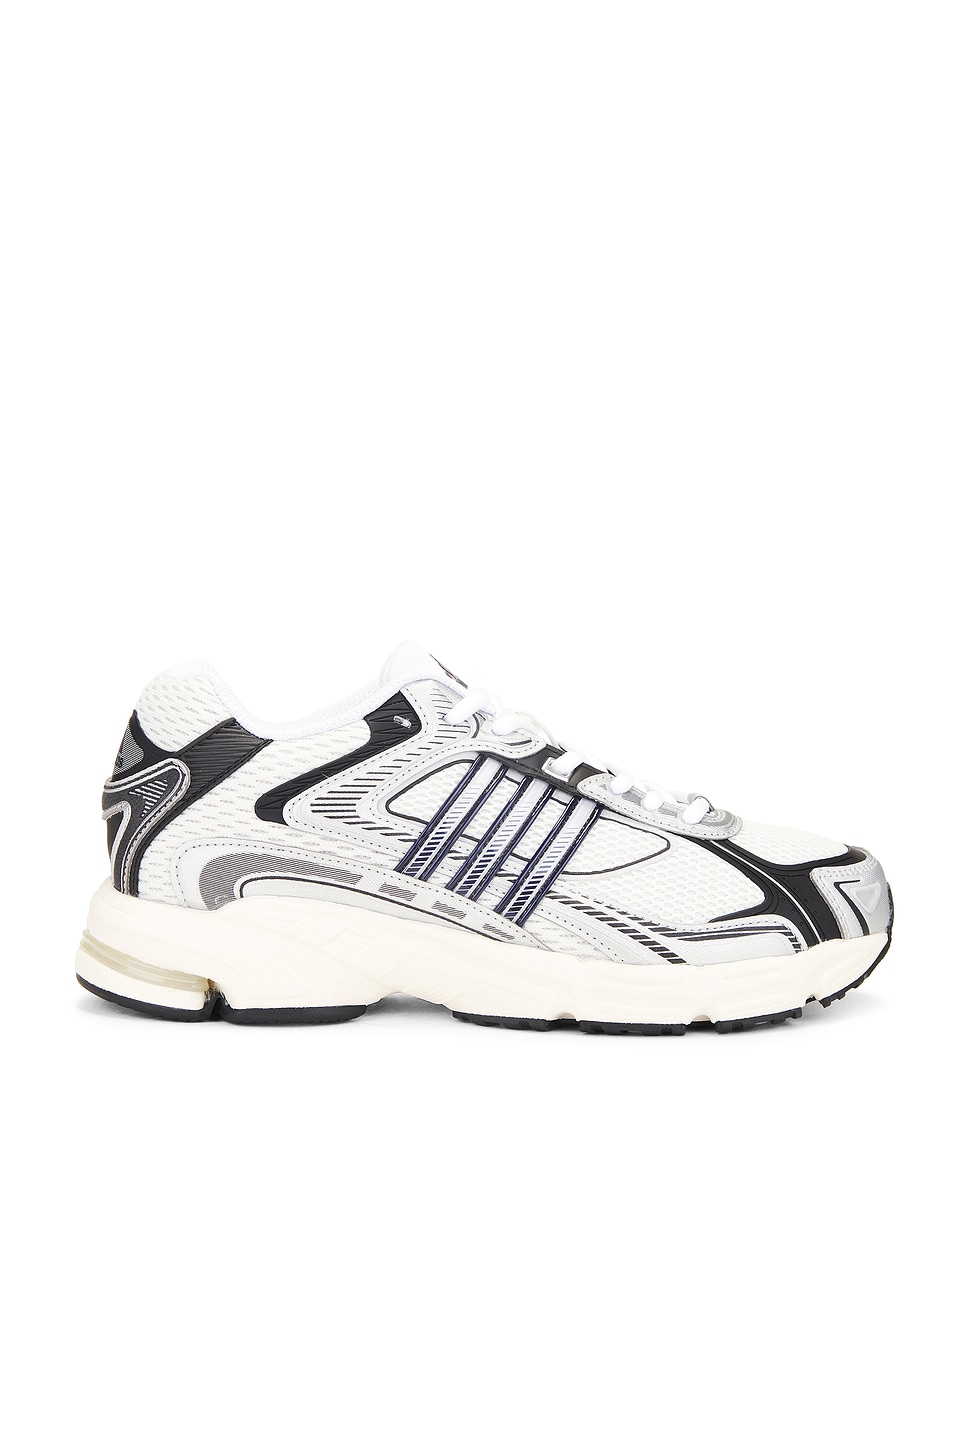 Image 1 of adidas Originals Response Cl Sneaker in Crystal White, White, & Core Black